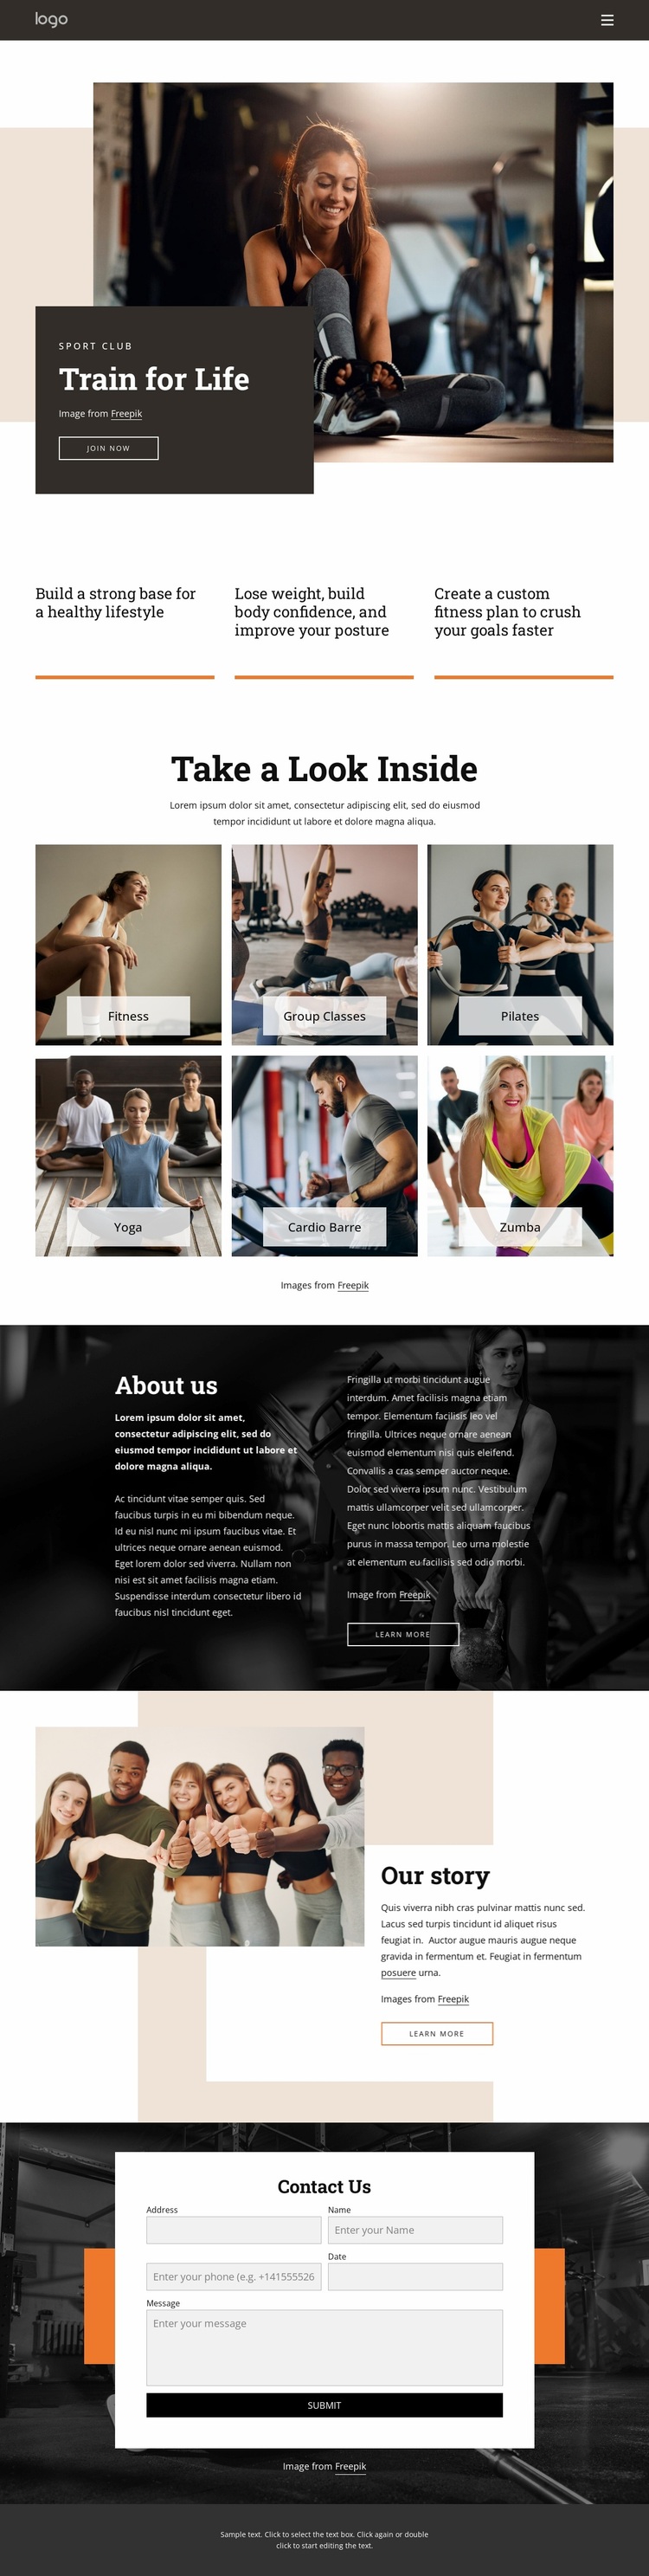 Get moving with our range of classes Website Design